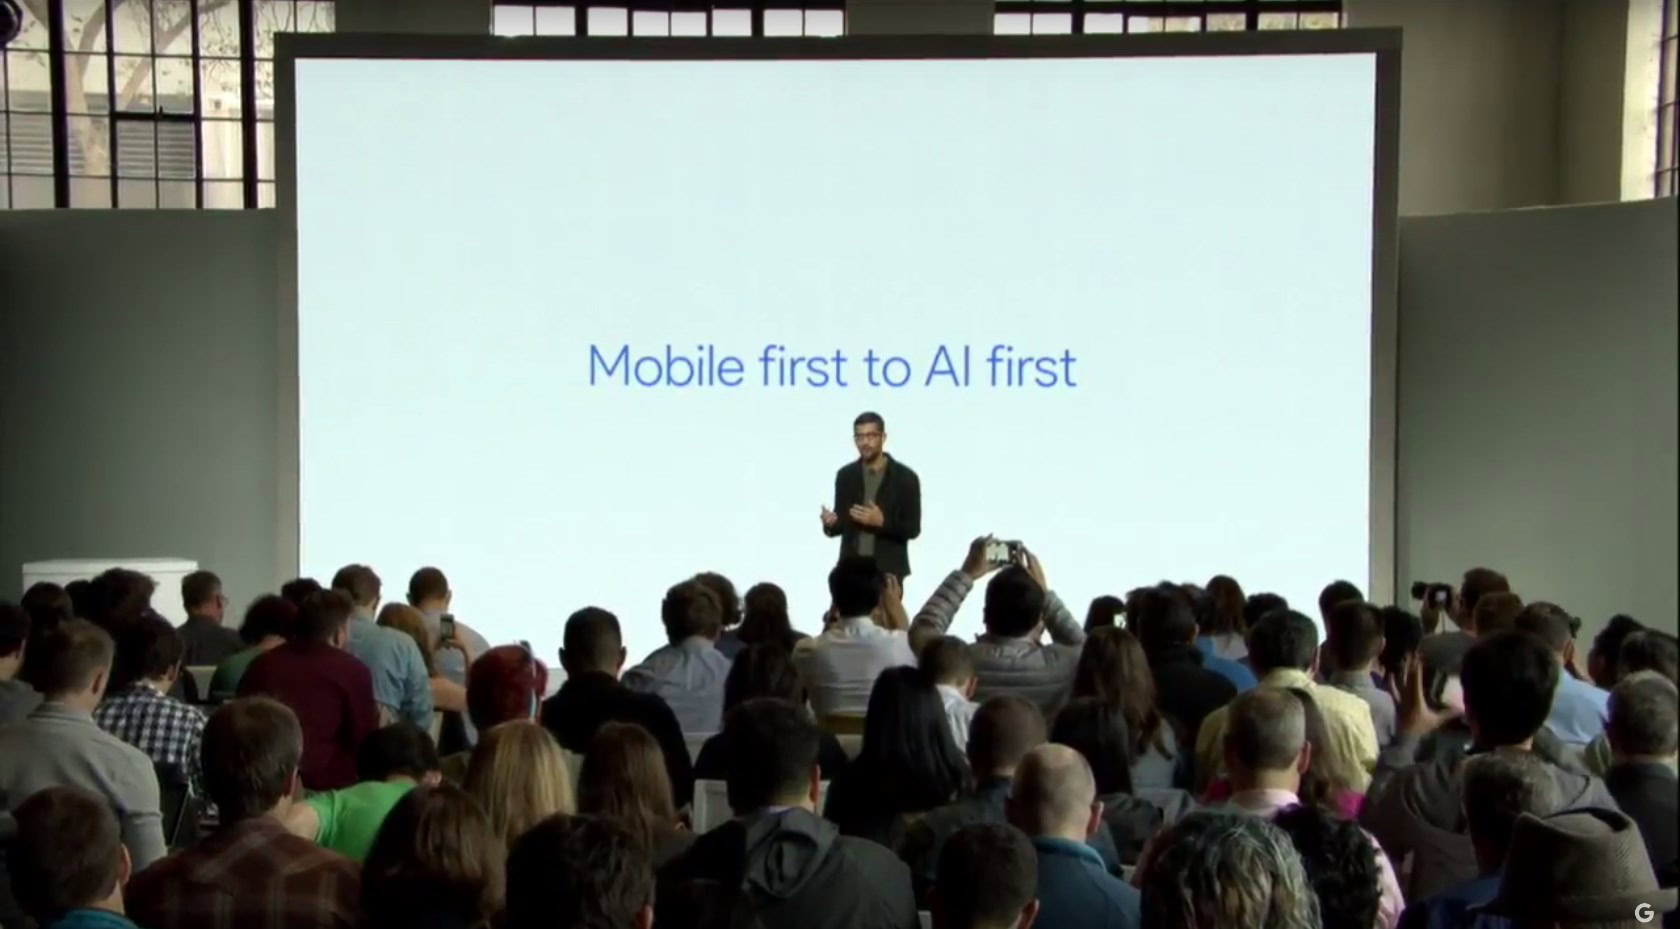 mobile first to AI first